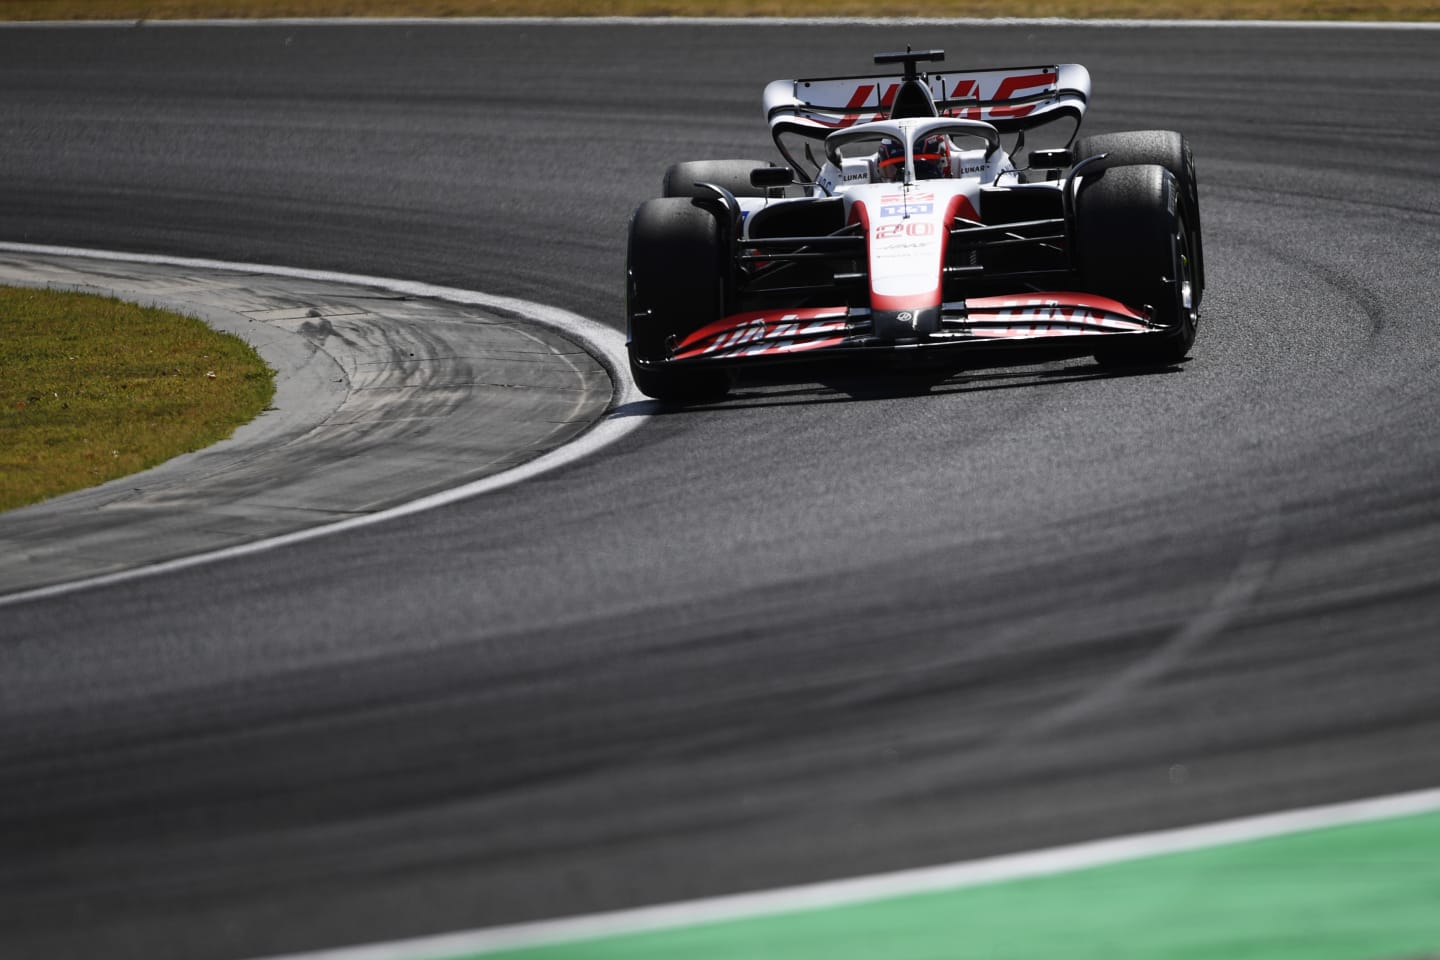 BUDAPEST, HUNGARY - JULY 29: Kevin Magnussen of Denmark driving the (20) Haas F1 VF-22 Ferrari on track during practice ahead of the F1 Grand Prix of Hungary at Hungaroring on July 29, 2022 in Budapest, Hungary. (Photo by Rudy Carezzevoli - Formula 1/Formula 1 via Getty Images)